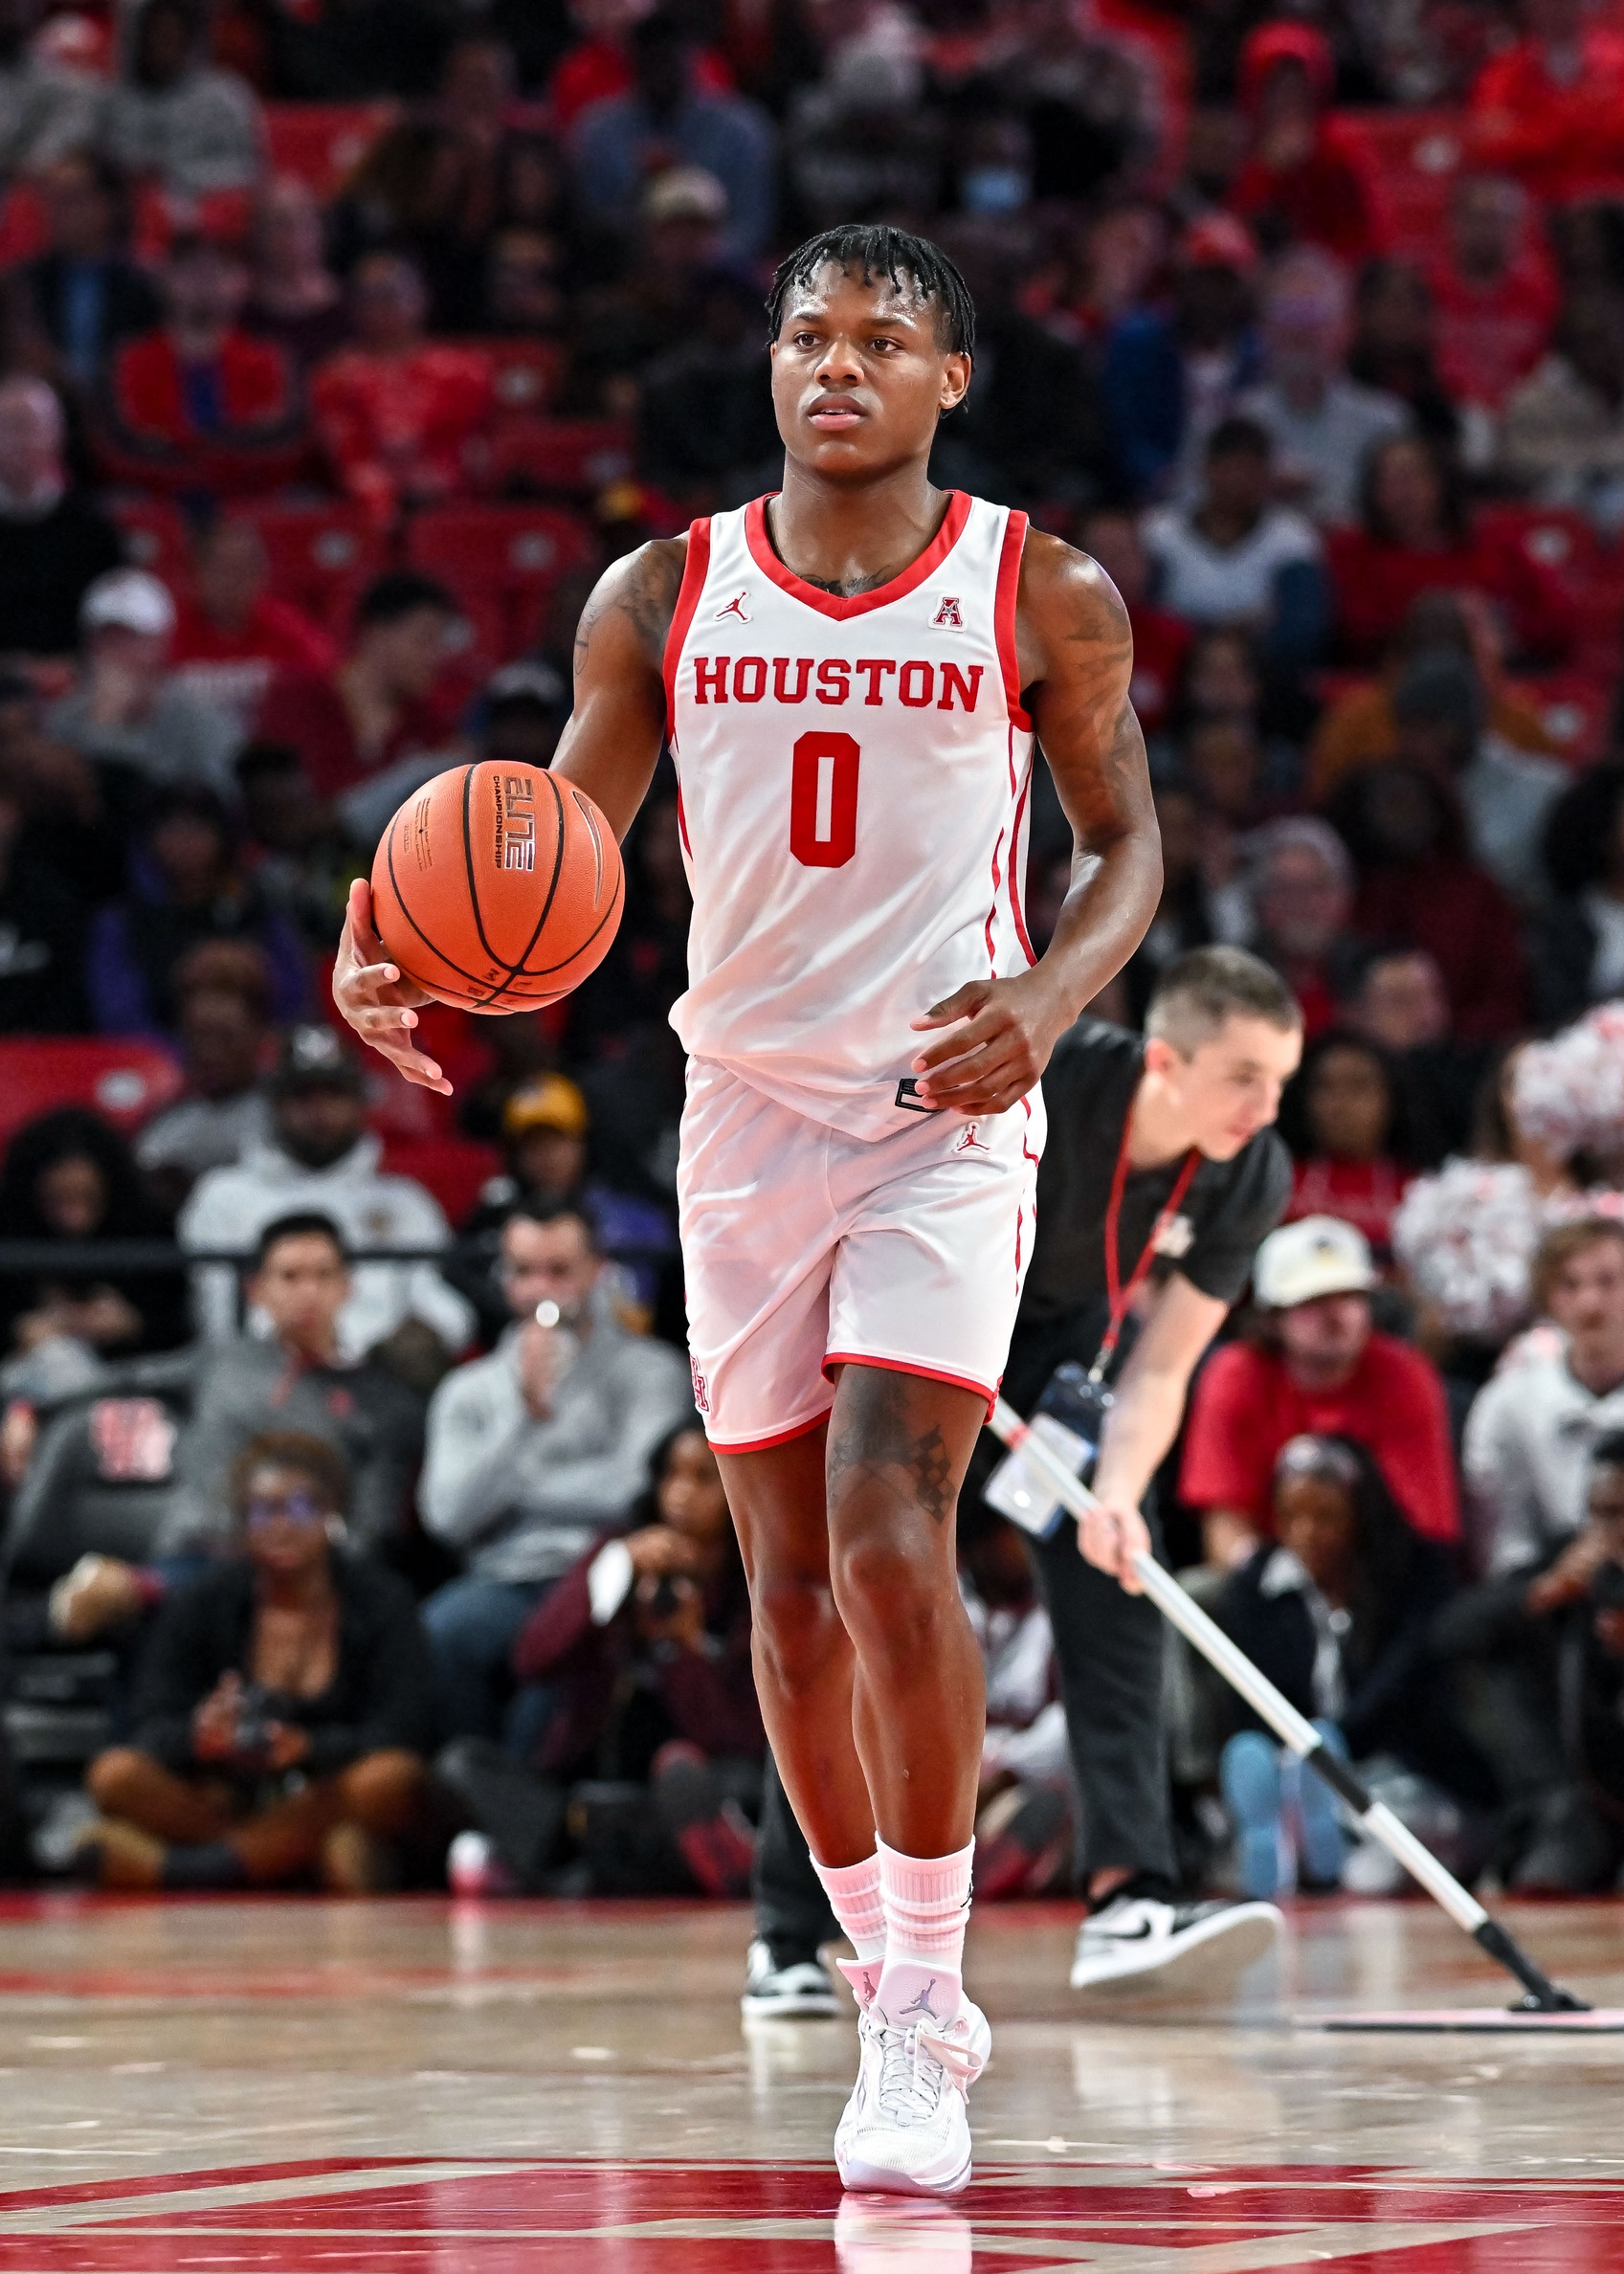 St. Mary's Gaels vs Houston Cougars Prediction, 12/3/2022 College Basketball Picks, Best Bets & Odds